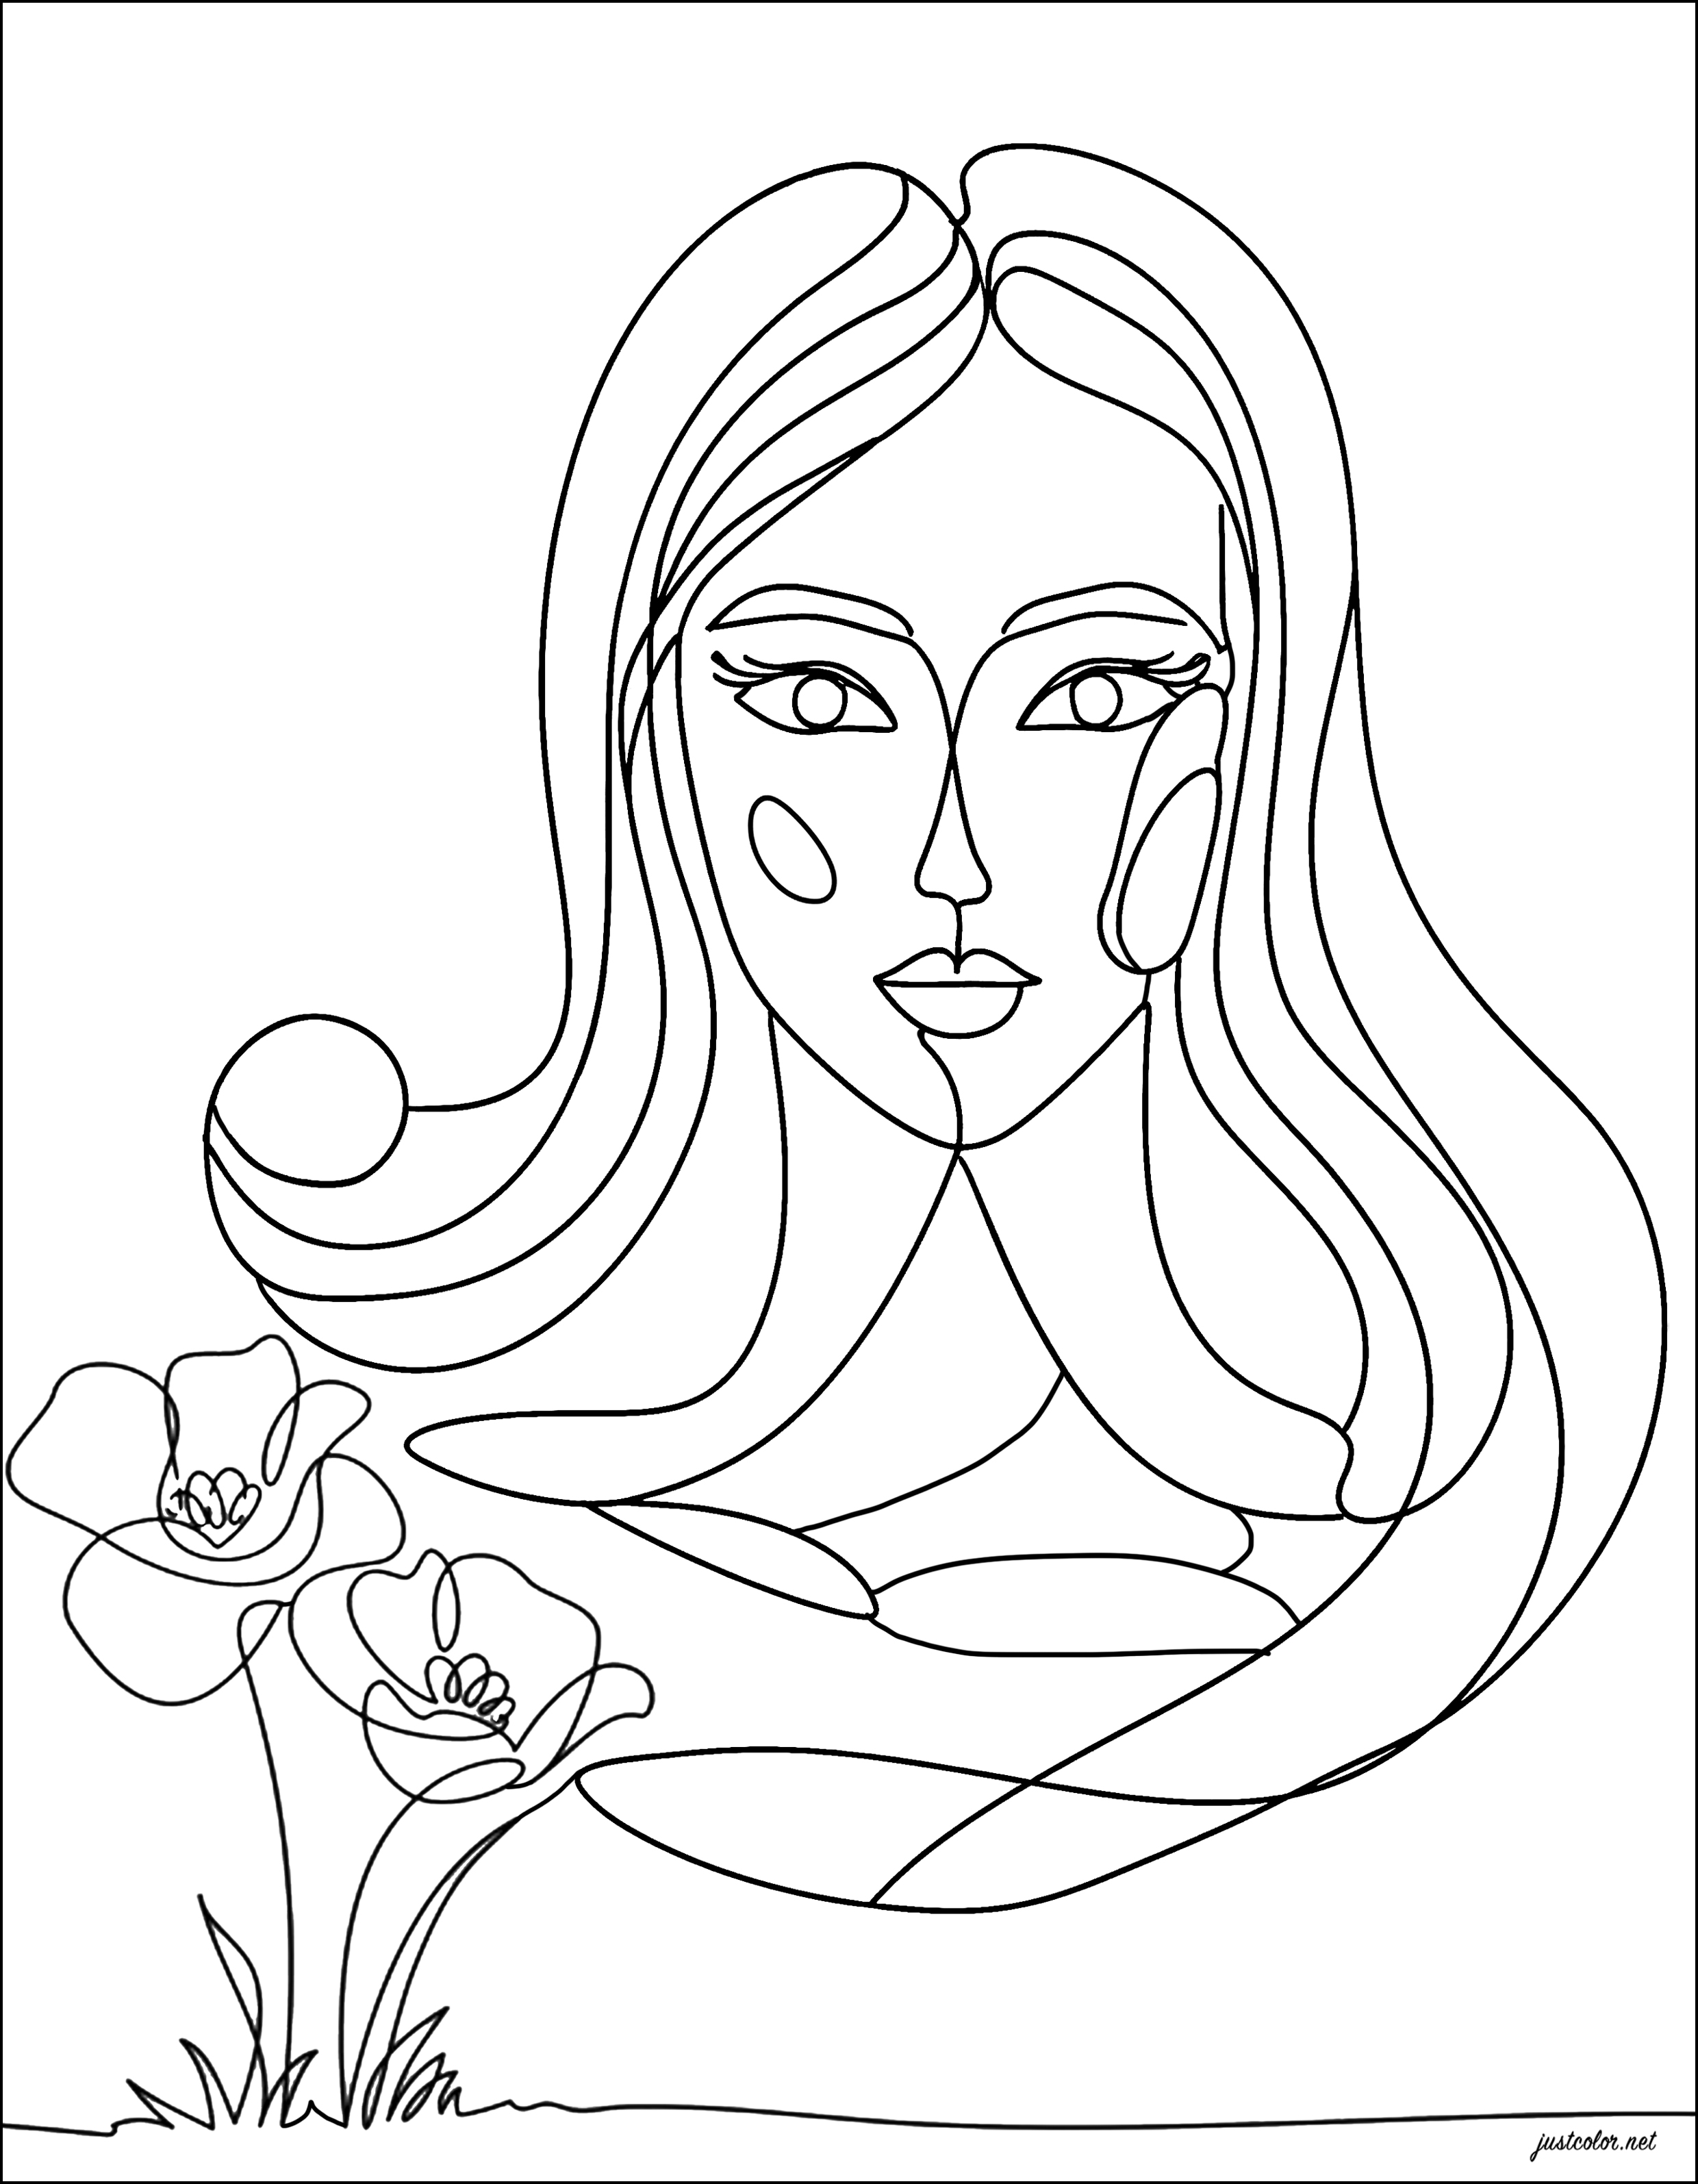 Woman and flowers (Line art). Line art is the artistic technique of creating images using only lines, without adding color or fill.